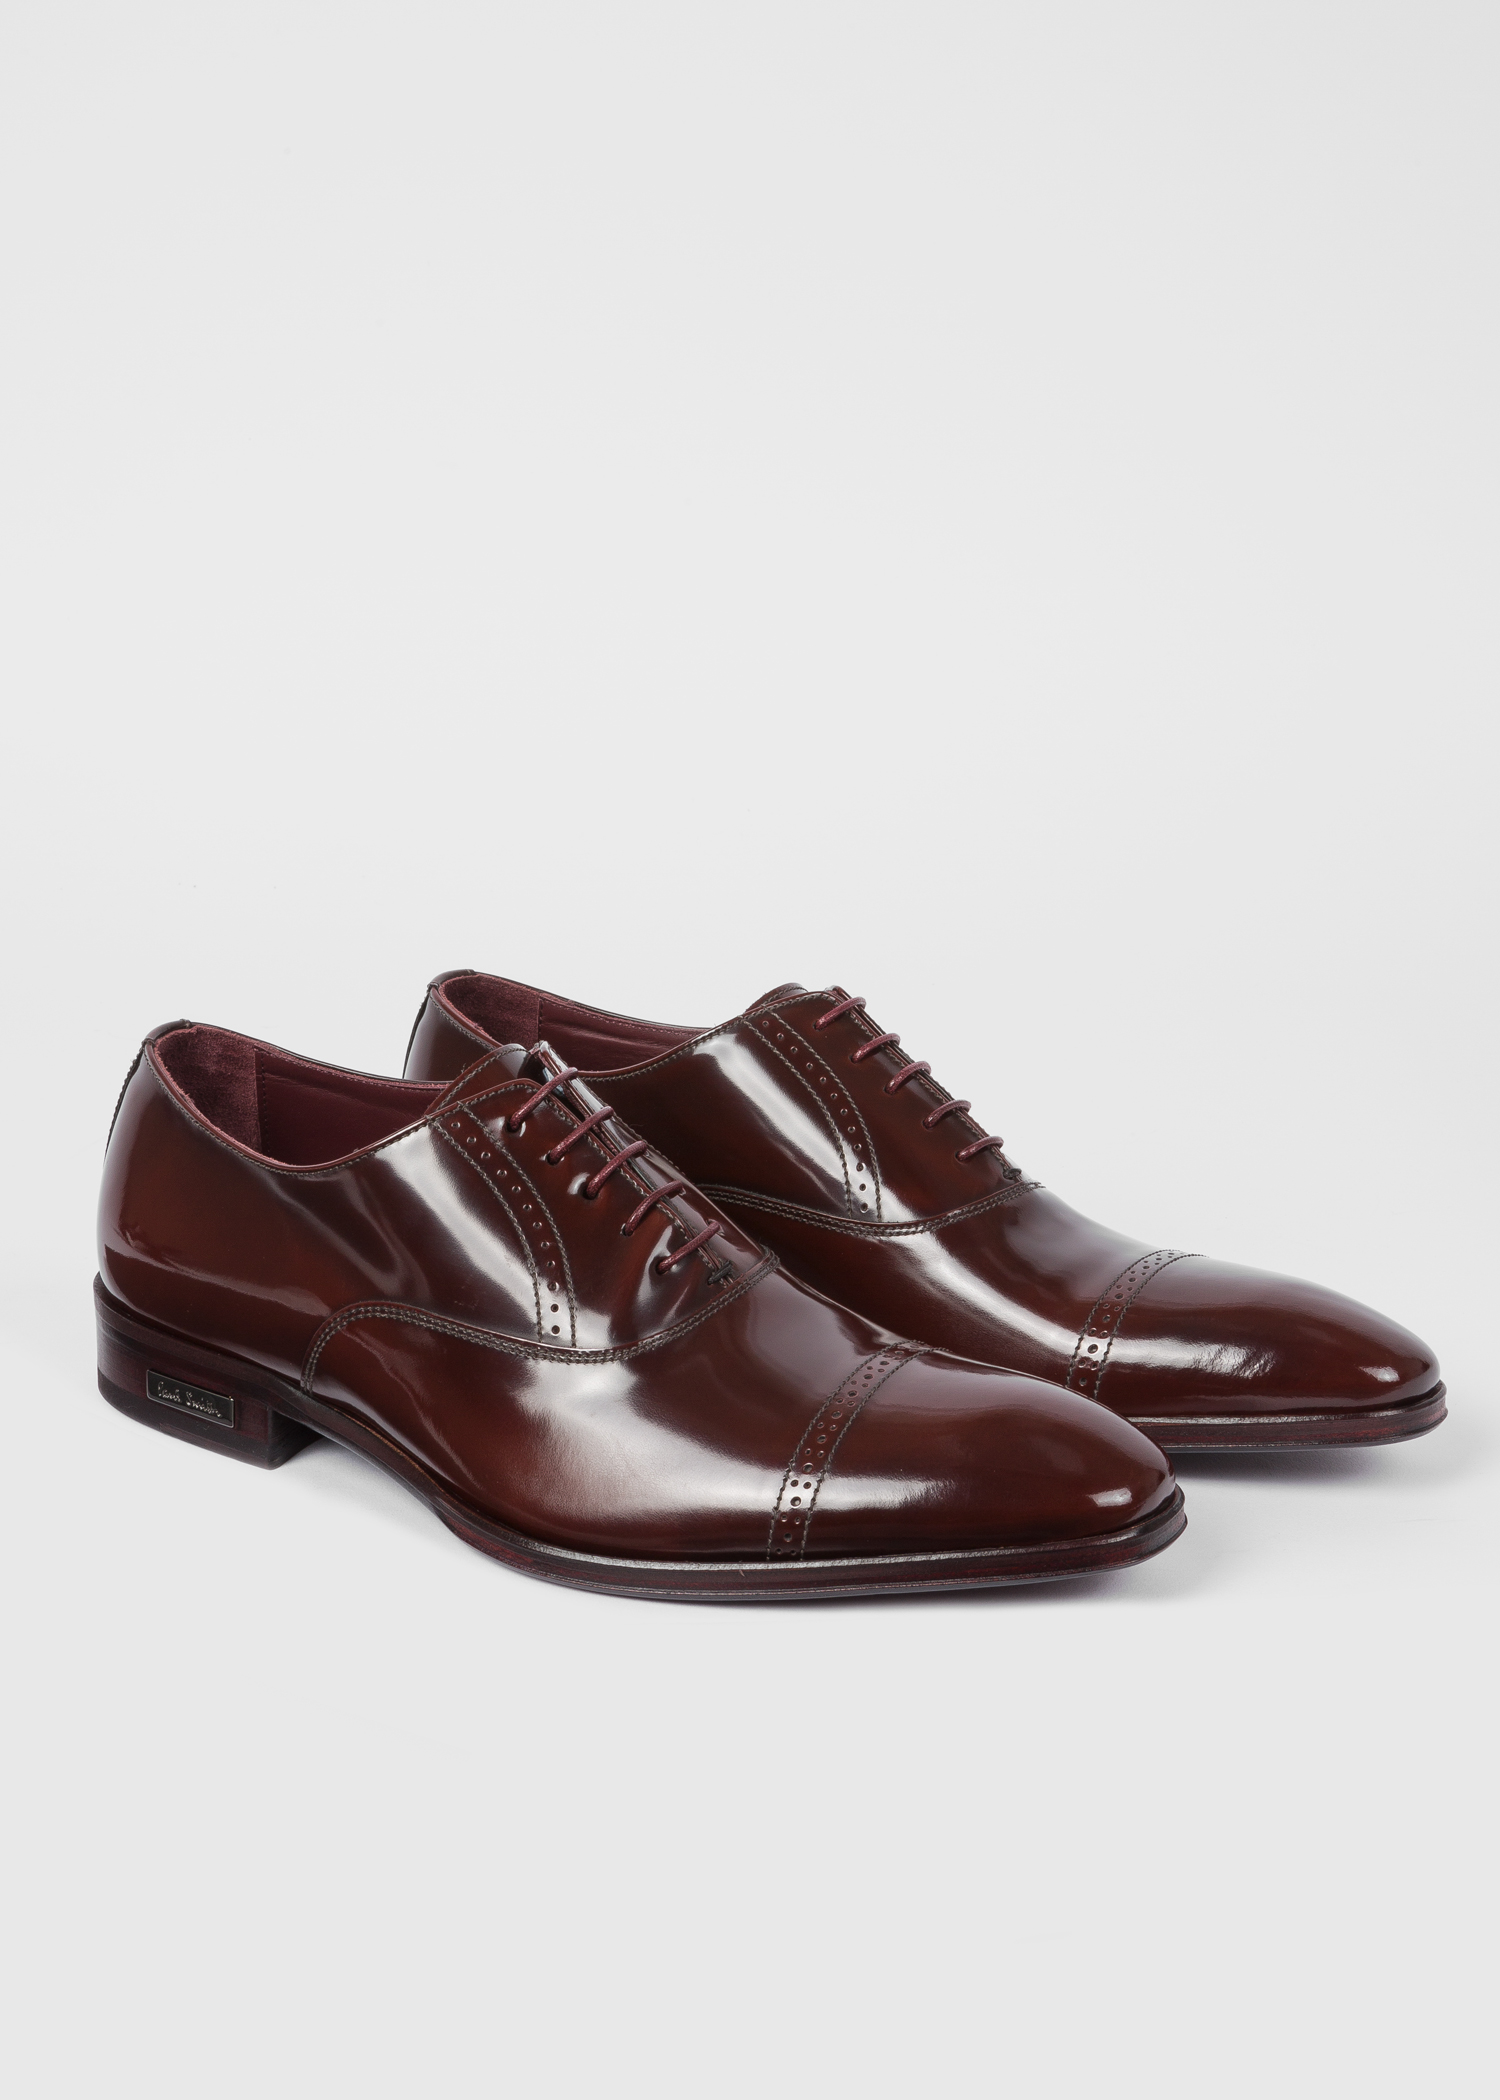 Men's Burgundy Patent Leather 'Lord' Oxford Shoes - Paul Smith US